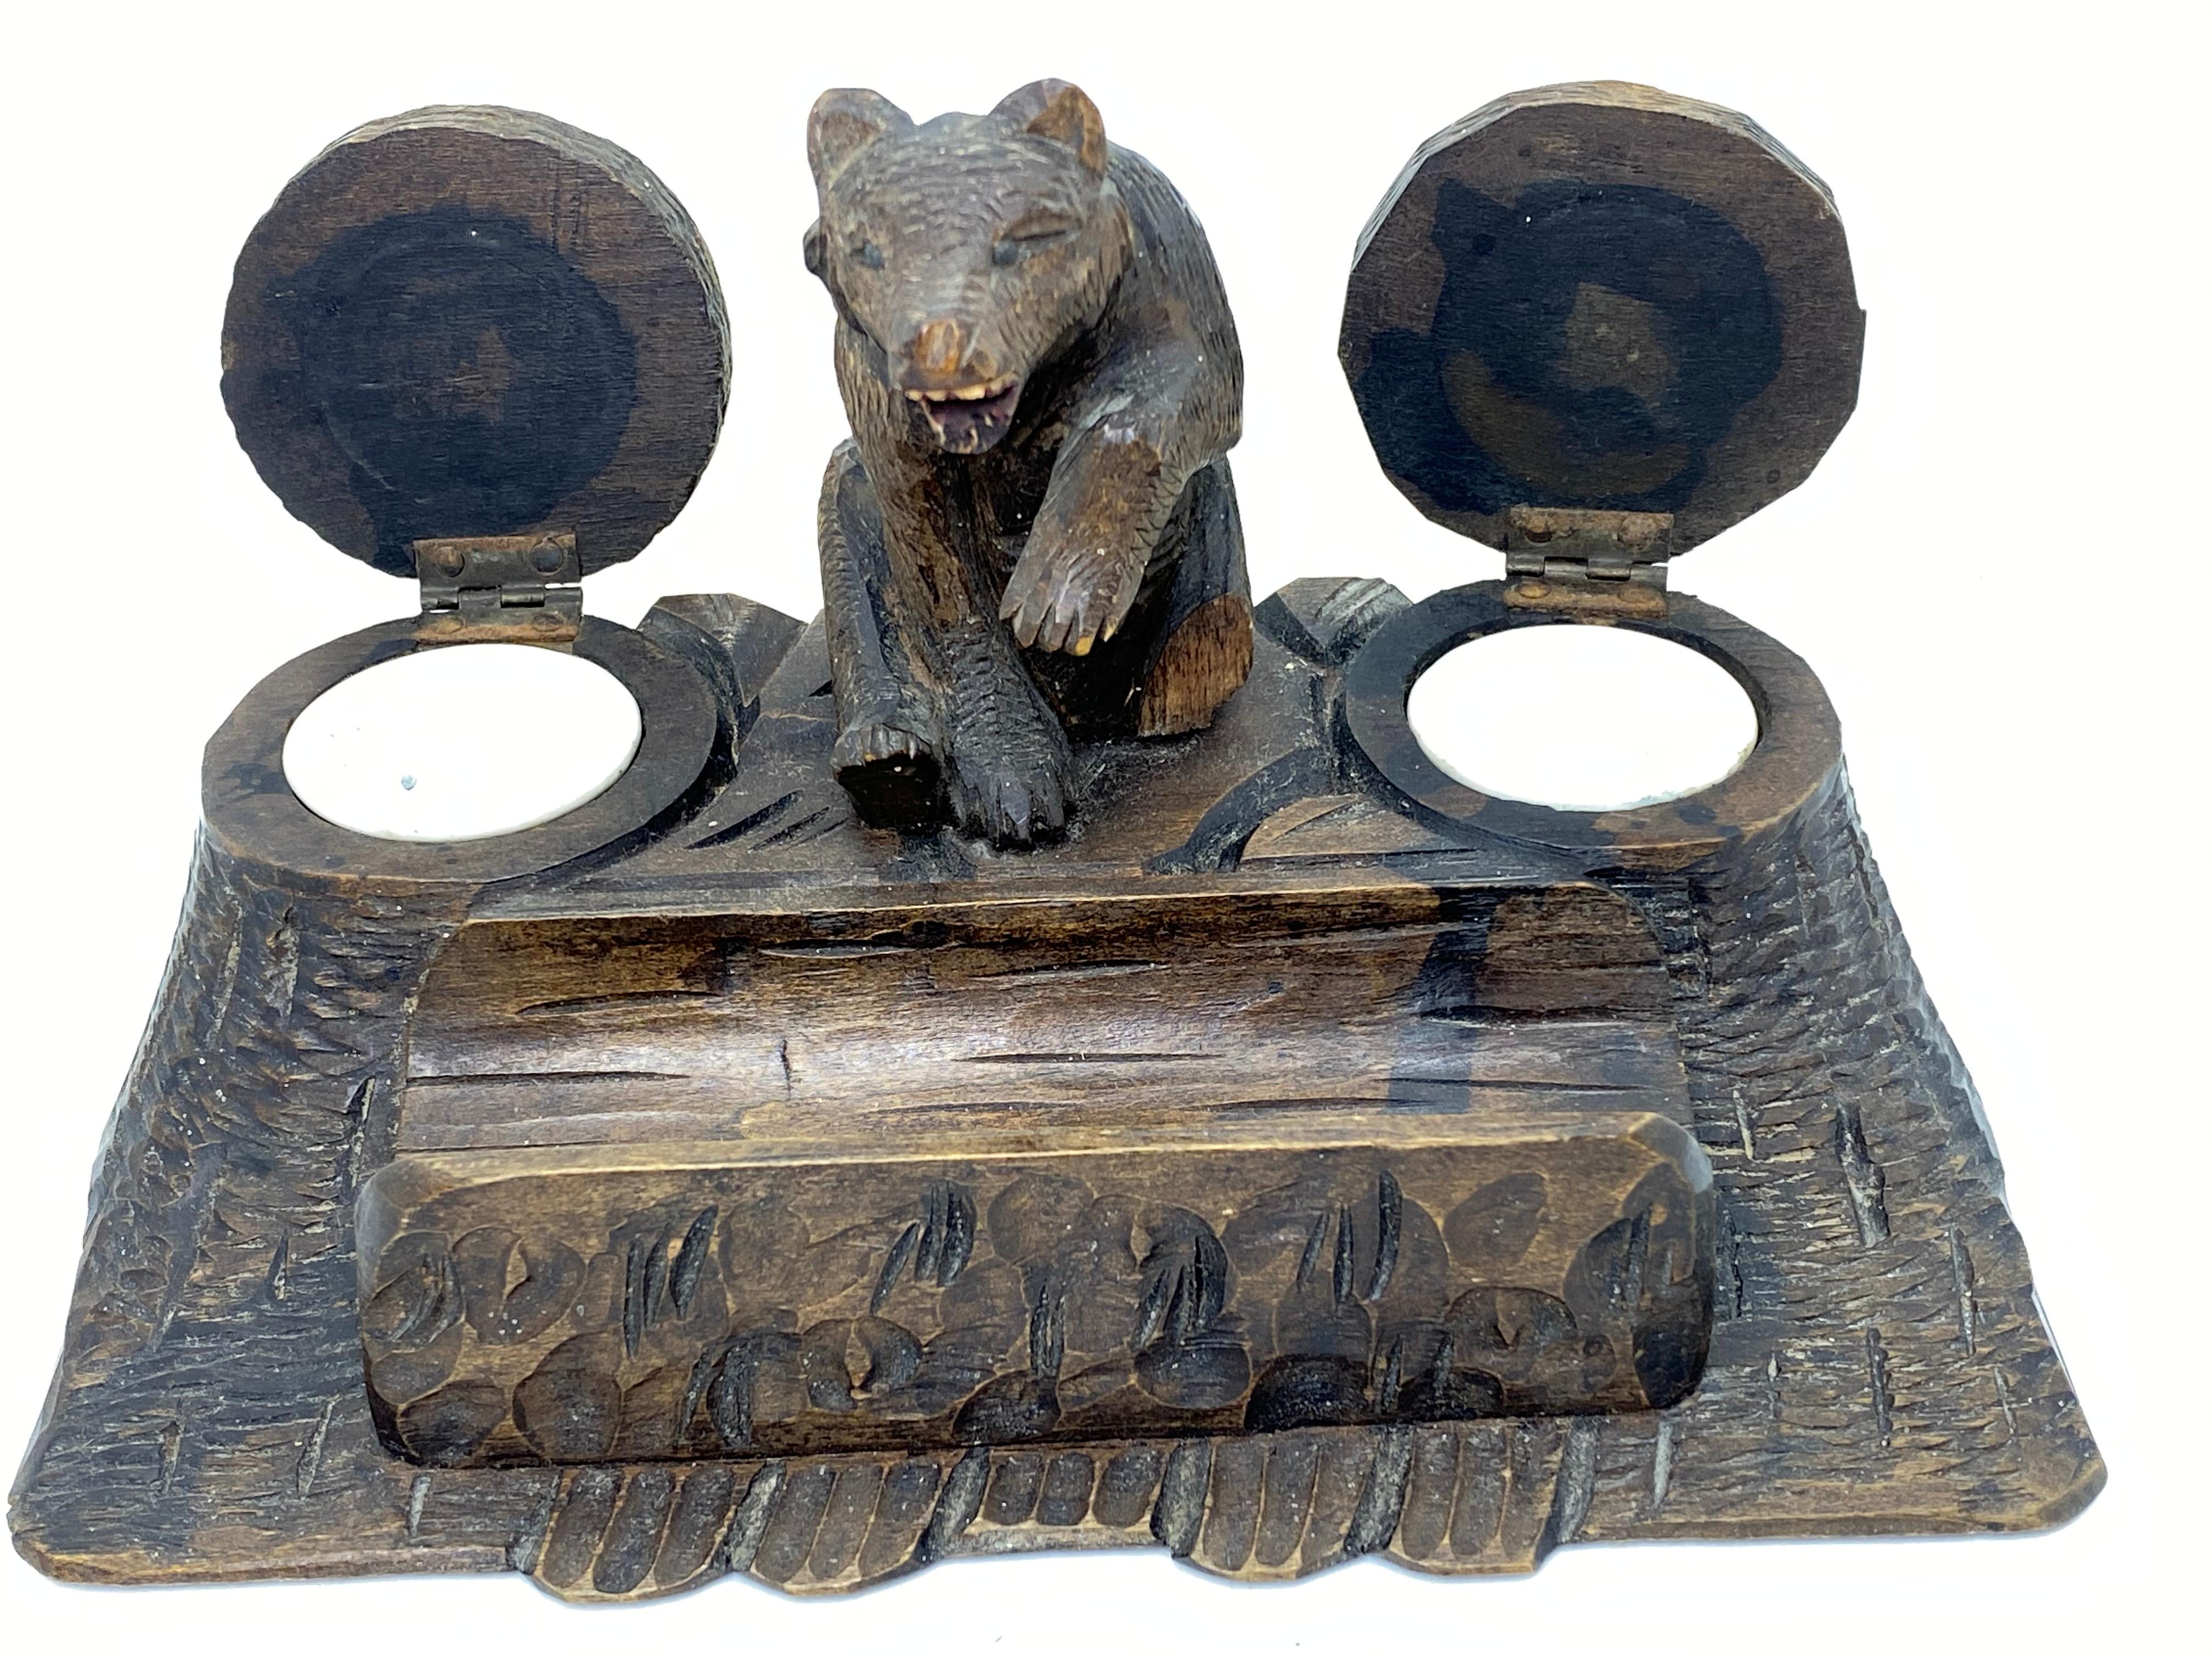 Classic 1890s Black Forest Brienz wood carved inkwell in form of a bear. Nice addition to your room or just for use it on your desk. Made of hand carved wood and glass eyes. Found at an estate sale in Vienna, Austria.